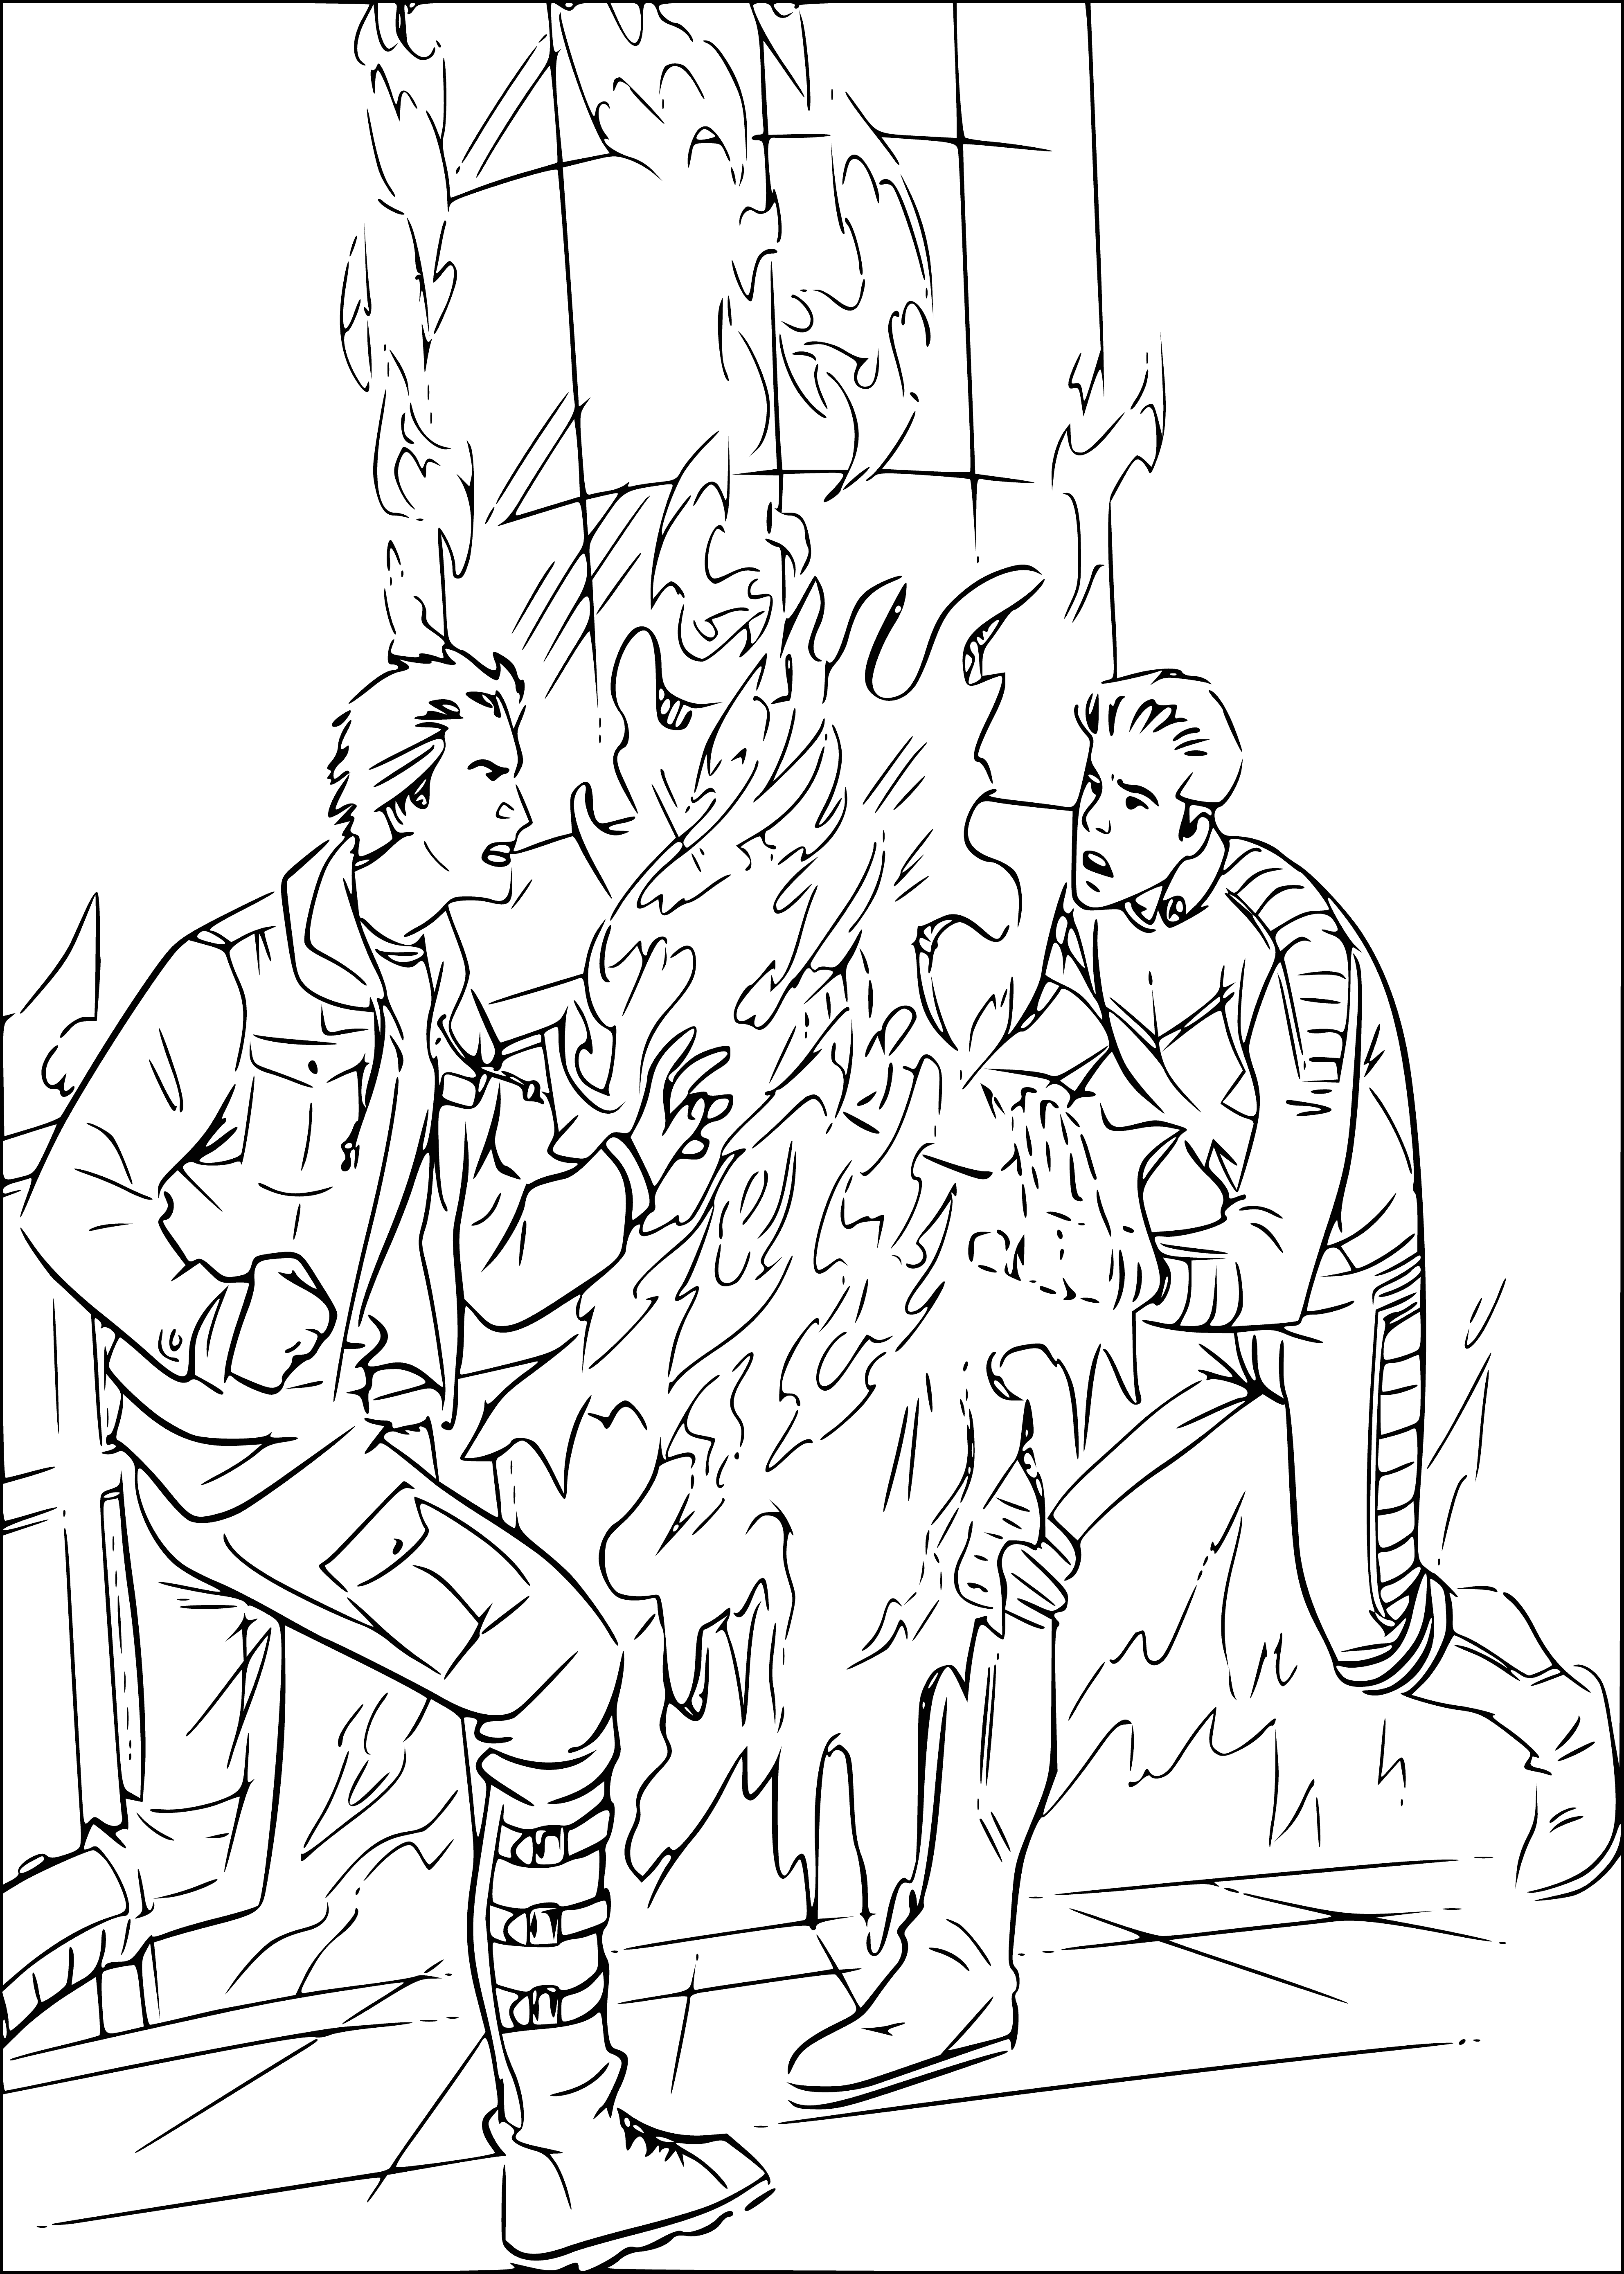 coloring page: X-Men battle each other with icicles and flames; Cyclops & Jean Grey duking it out while others use special powers. Chaos reigns amidst ice & fire.